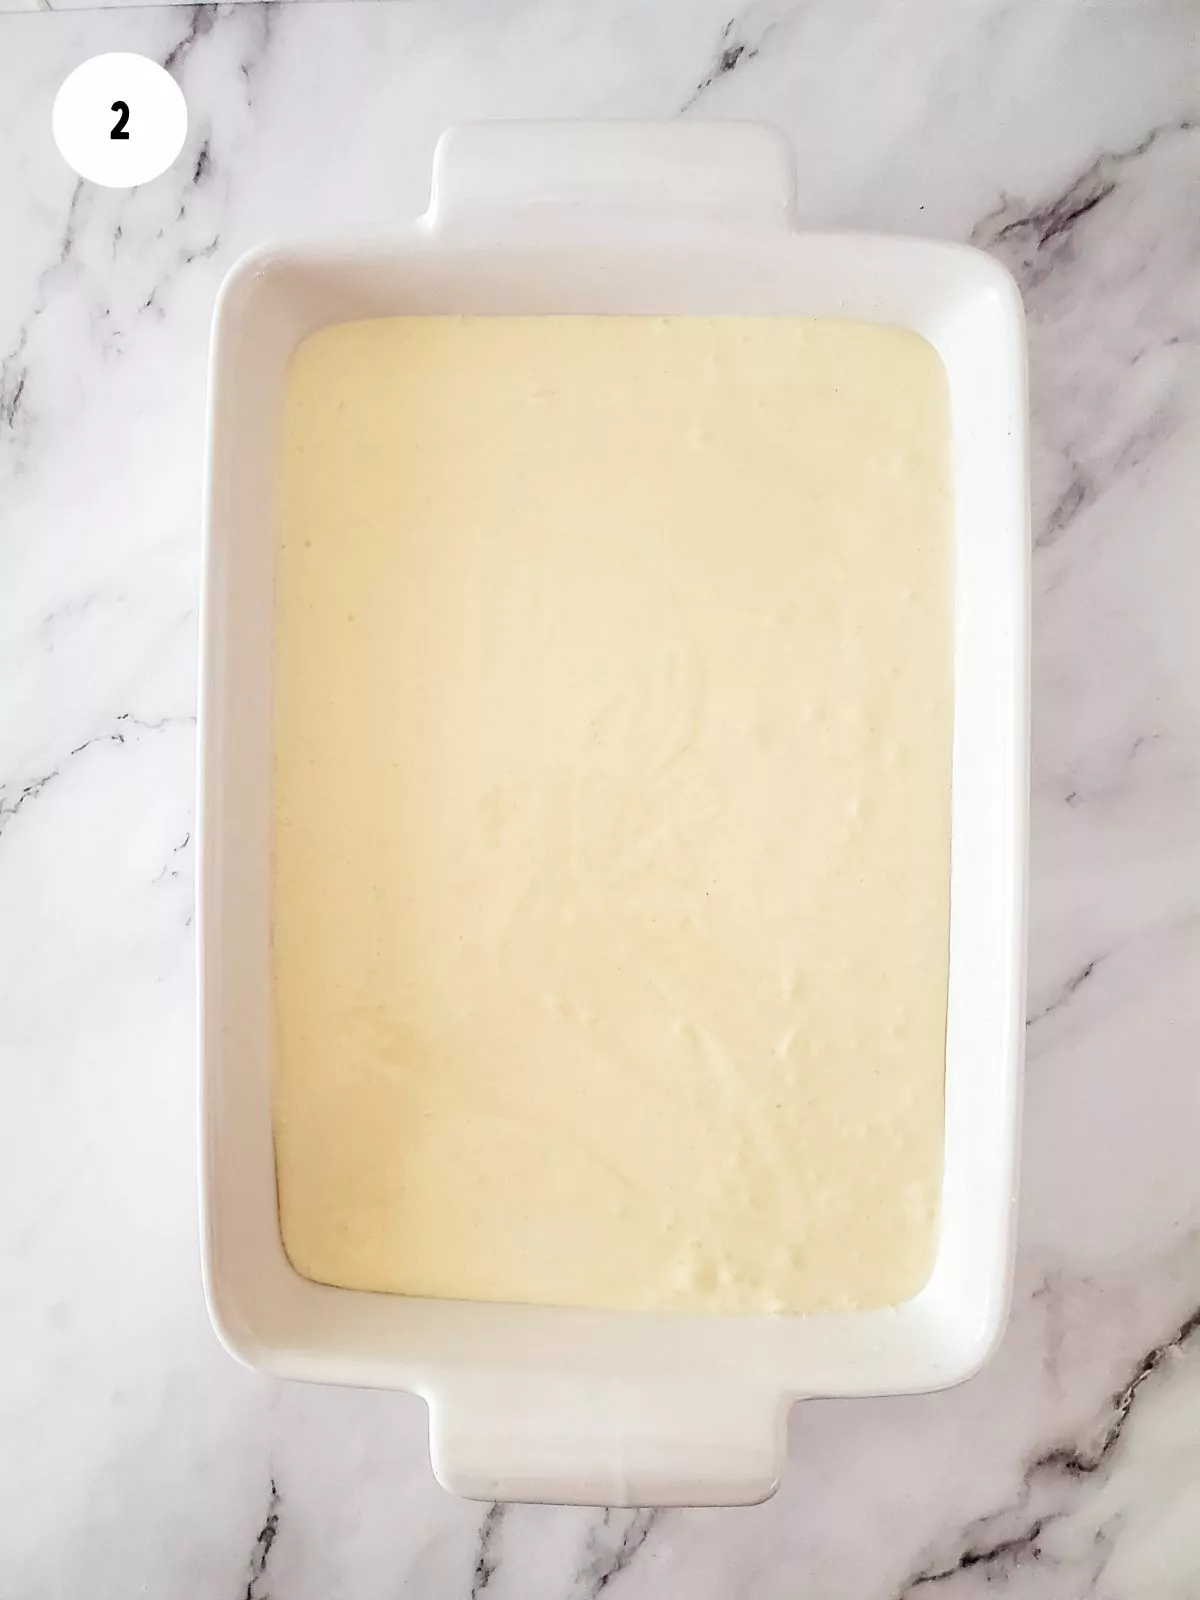 Pour cake batter into greased pan